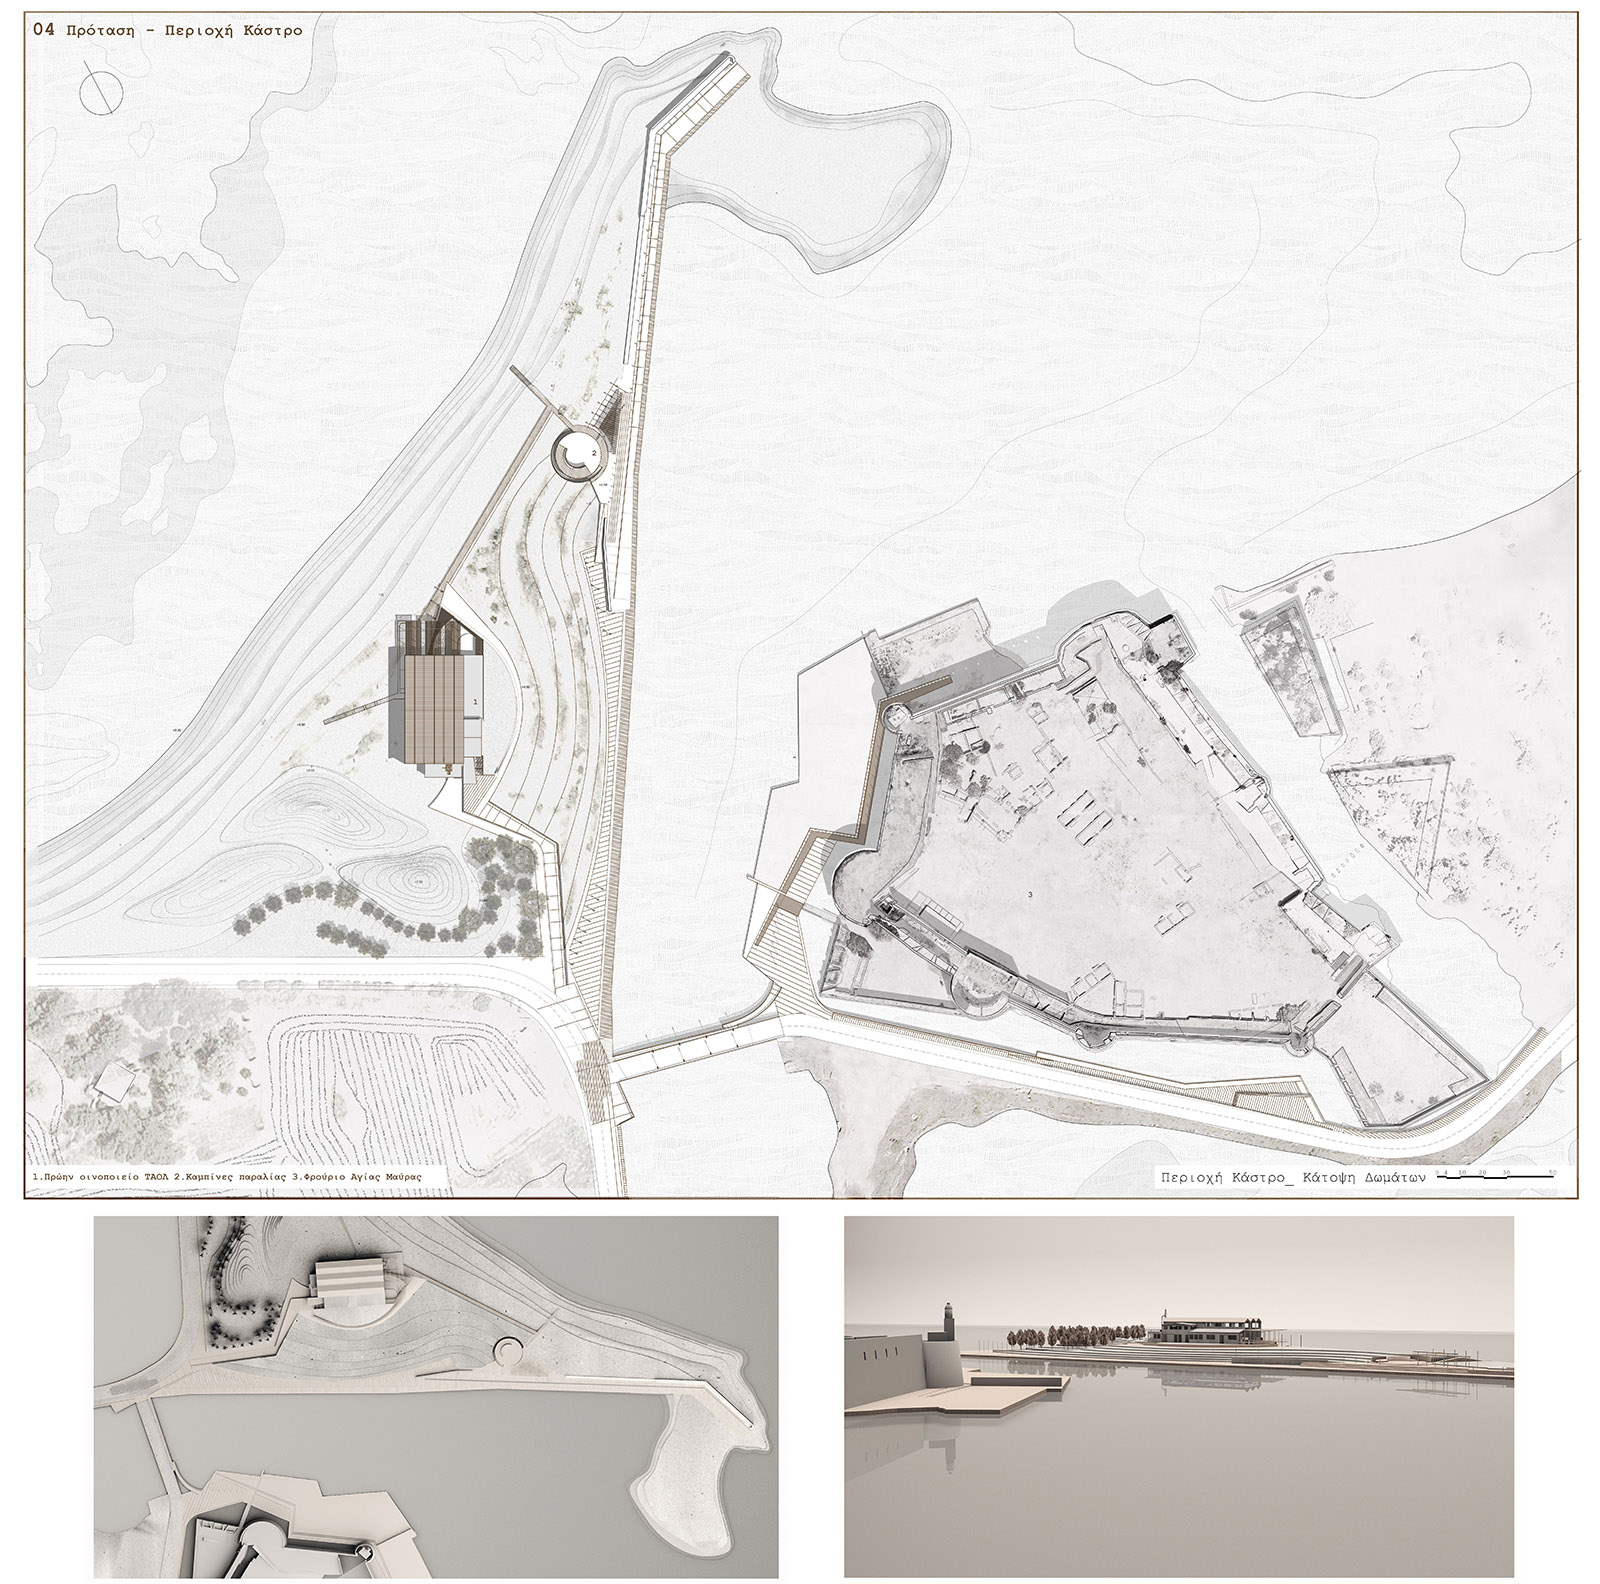 Archisearch Lefkada passages. Landscaping on the coastal northeastern front of Lefkada and restoration/reuse of the old TAOL winery | Diploma thesis by Alexandra Vasileiou, Katerina Voukelatou